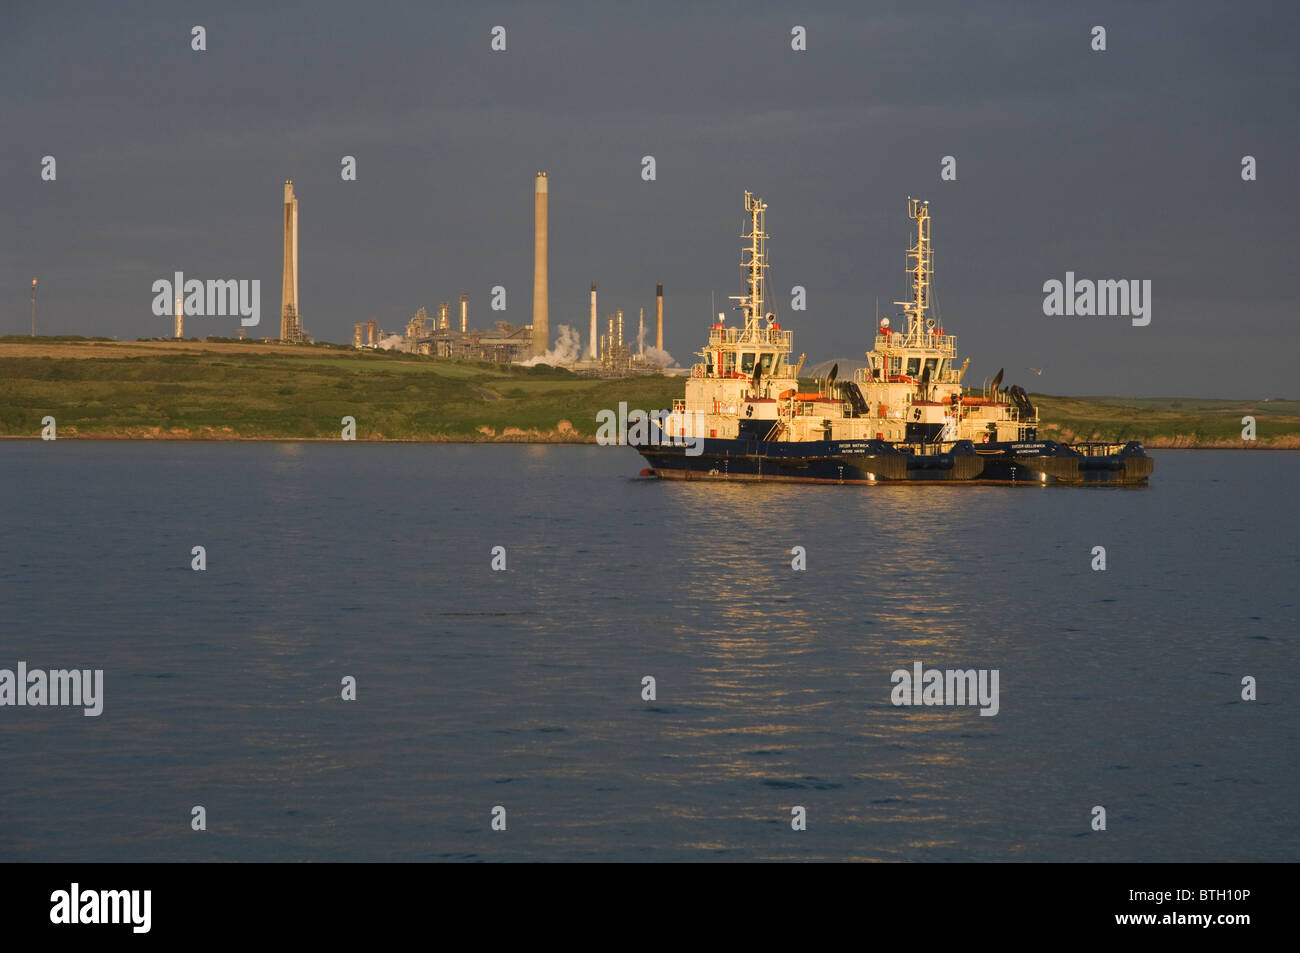 Tugs and Texaco oil refinery, Milford haven, Pembrokeshire, Wales, UK, Europe Stock Photo